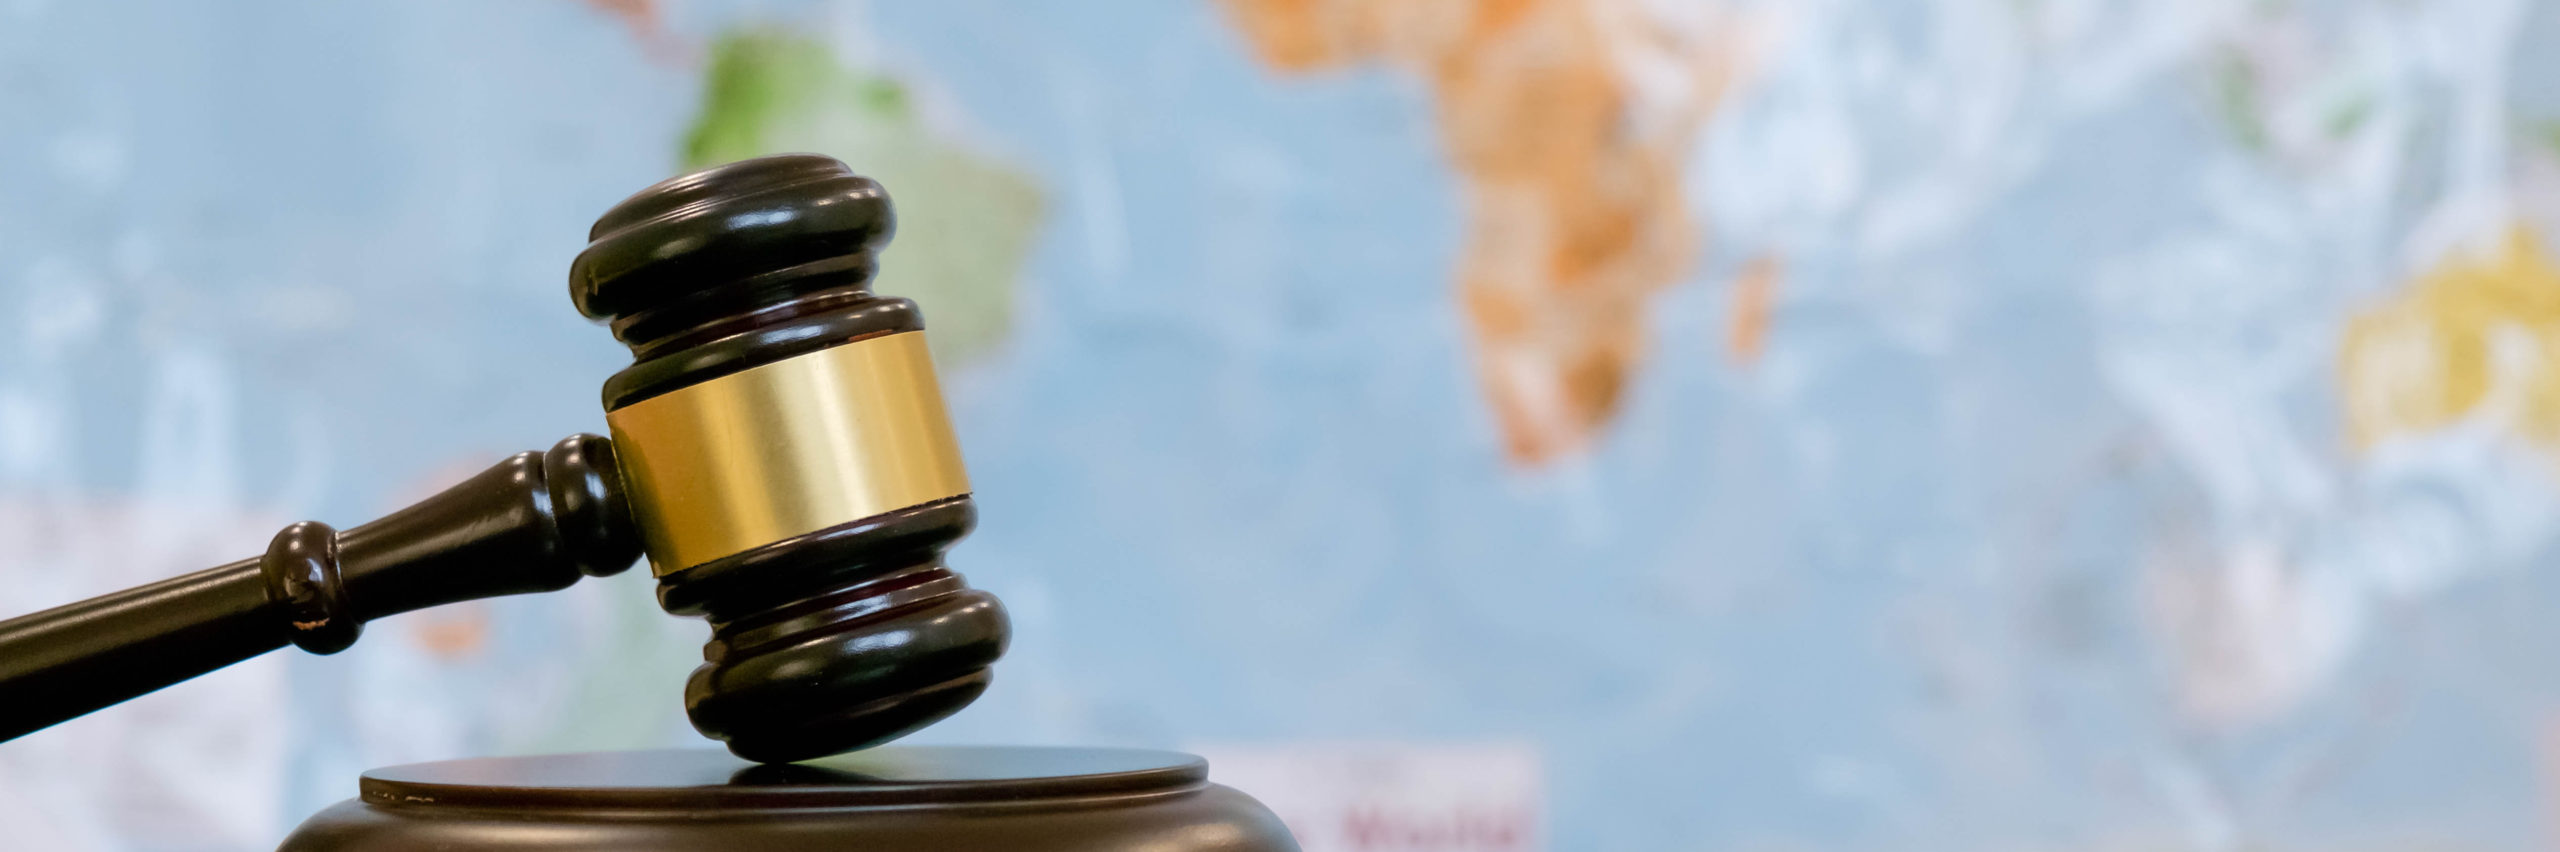 Judge's gavel and over world map. Symbol for jurisdiction. Law concept a wooden judges gavel on table in a courtroom or law enforcement office on blue background. Copy space for text - Image